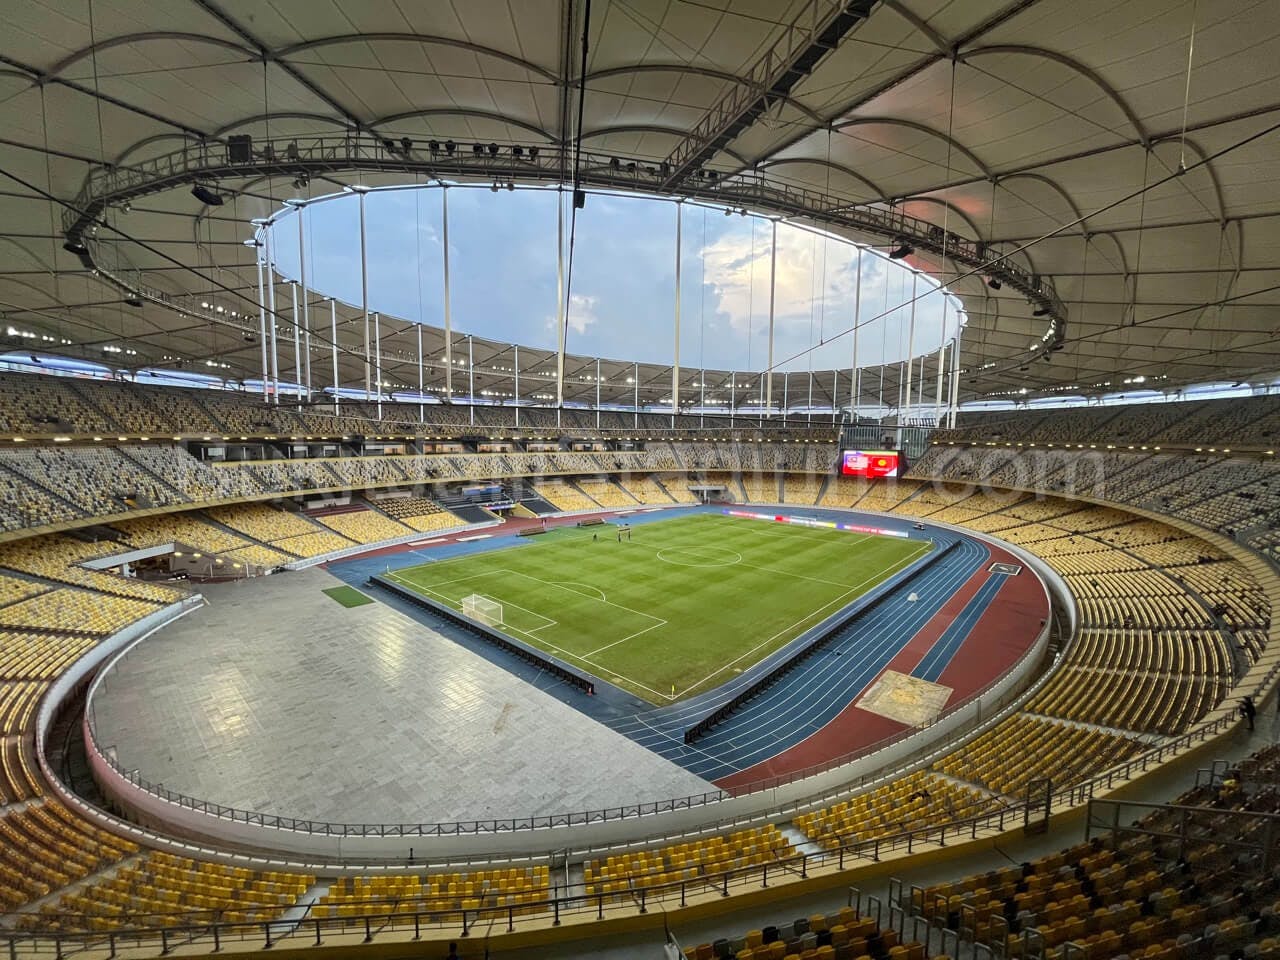 0.5x View of Bukit Jalil field from section 319 of Stadium Bukit Jalil.